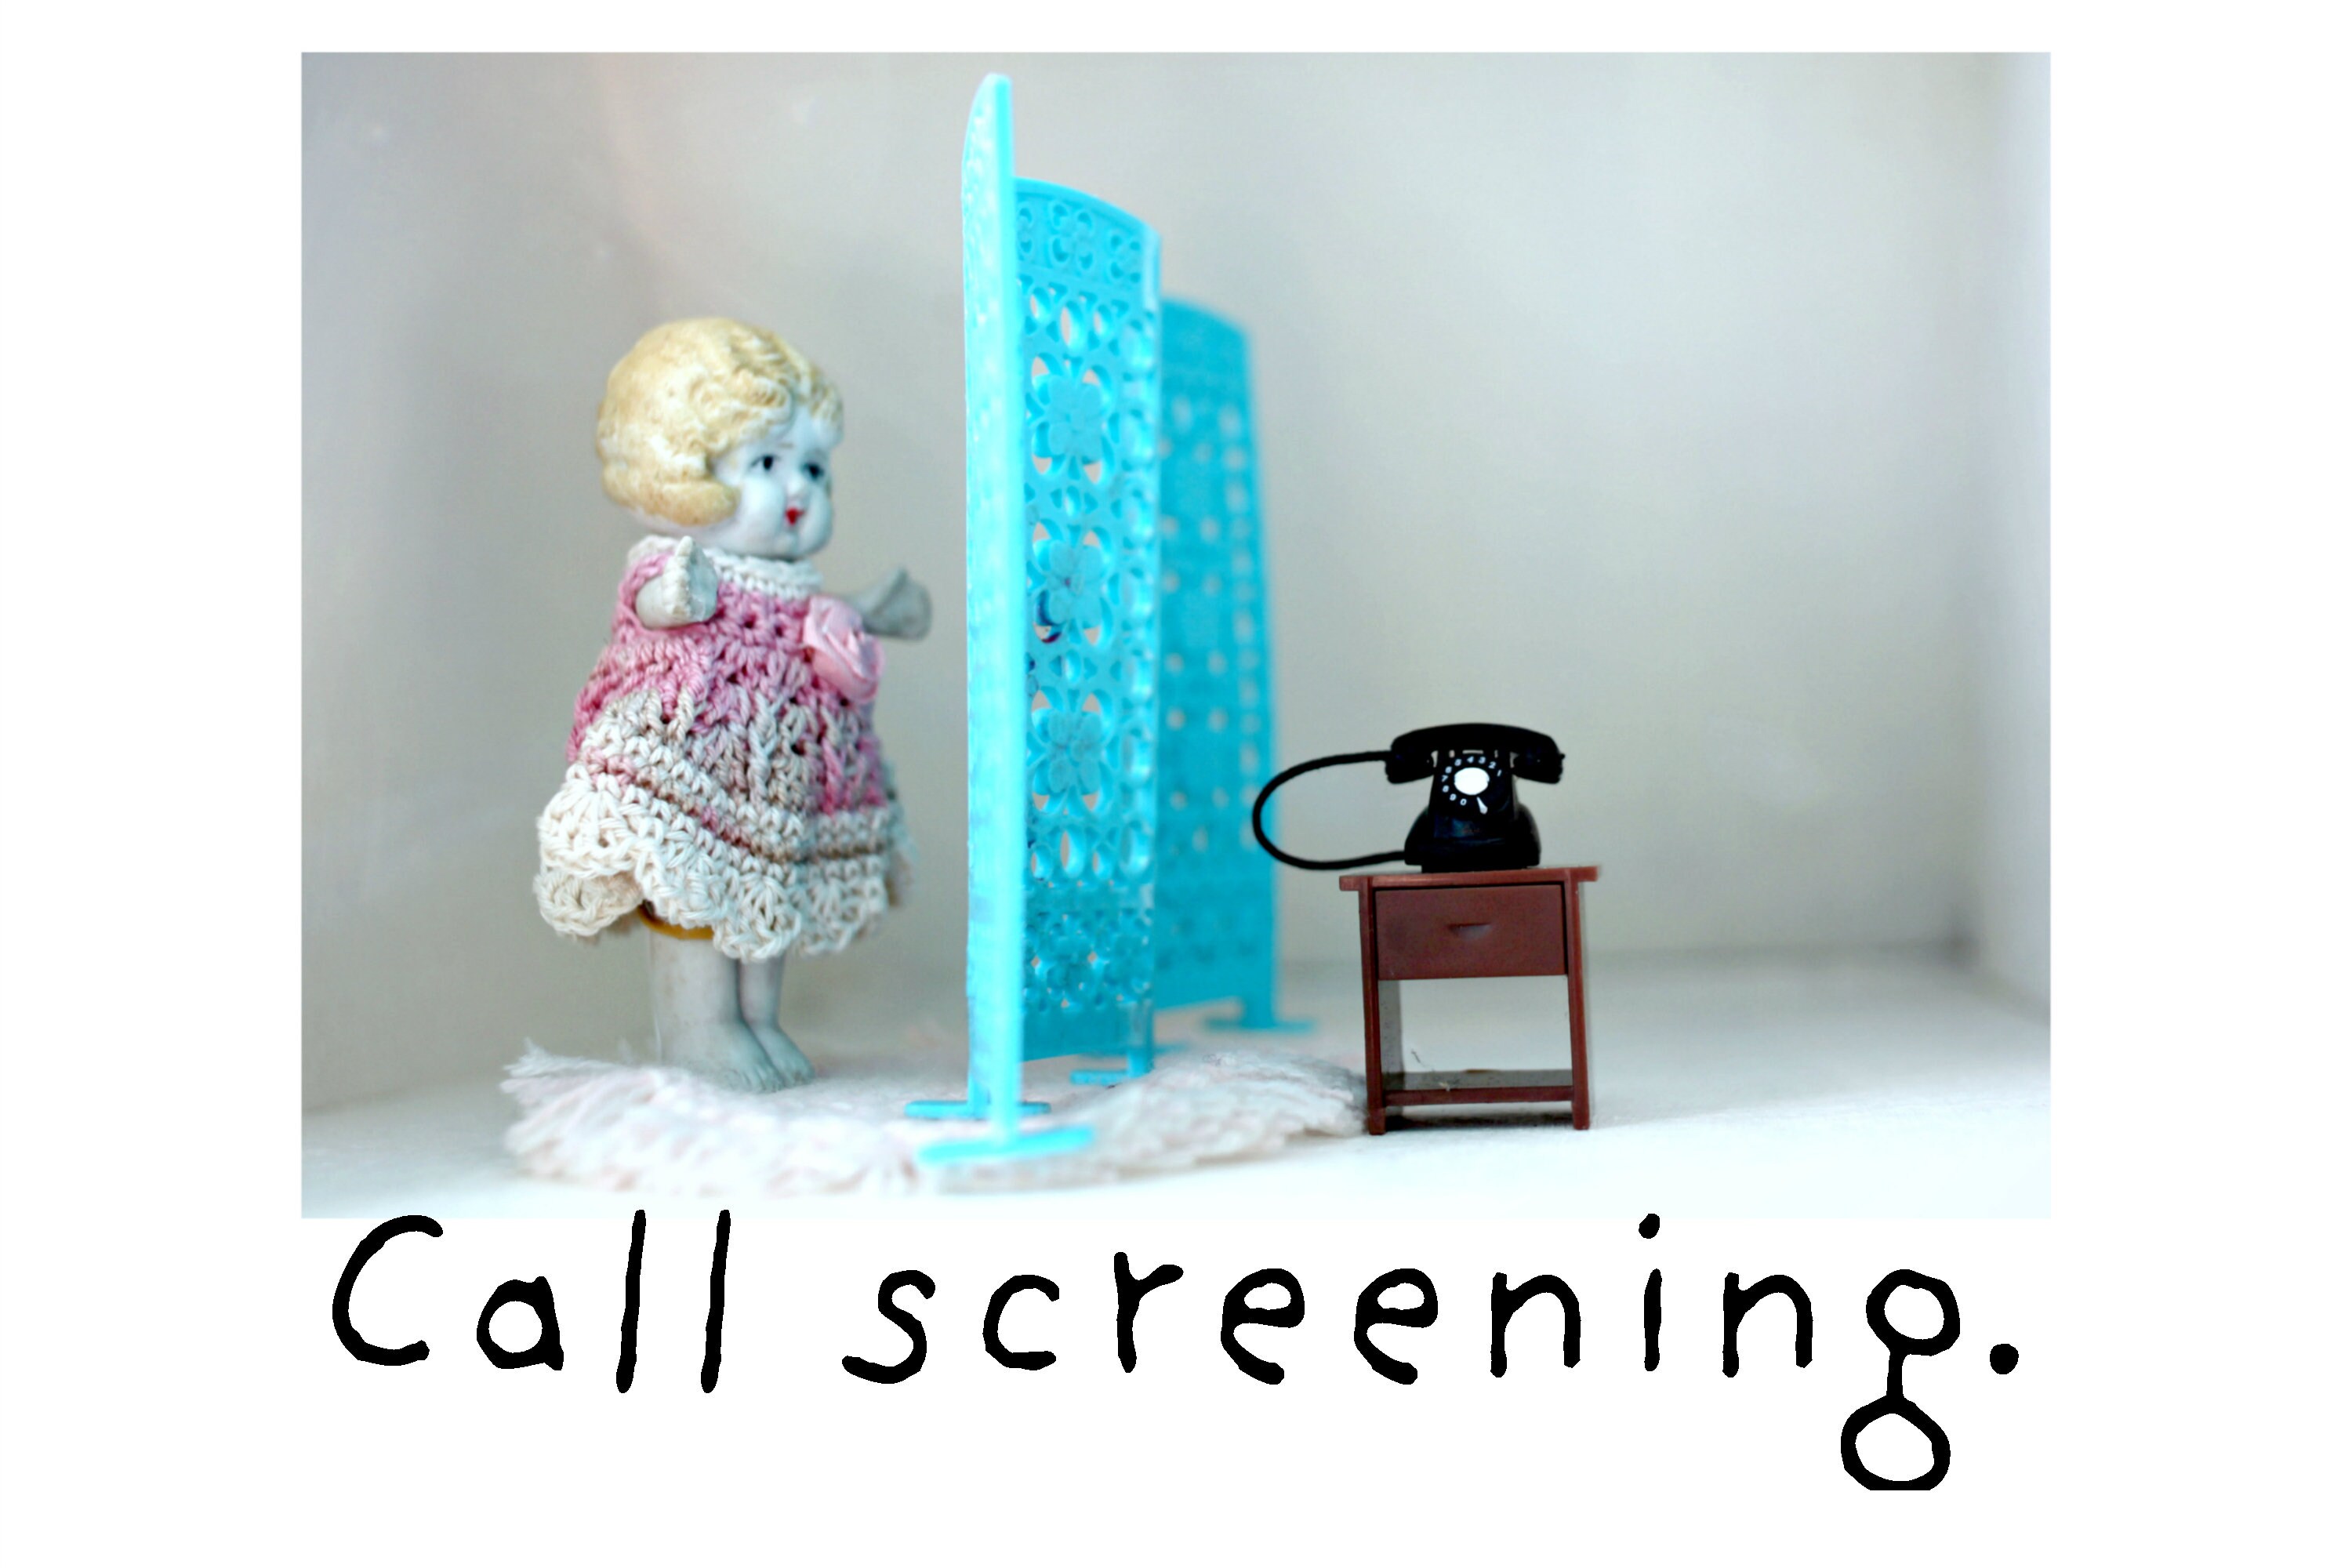 Call Screening Humor Bisque Dolly Claudia Traveling Doll Funny Etsy Uk